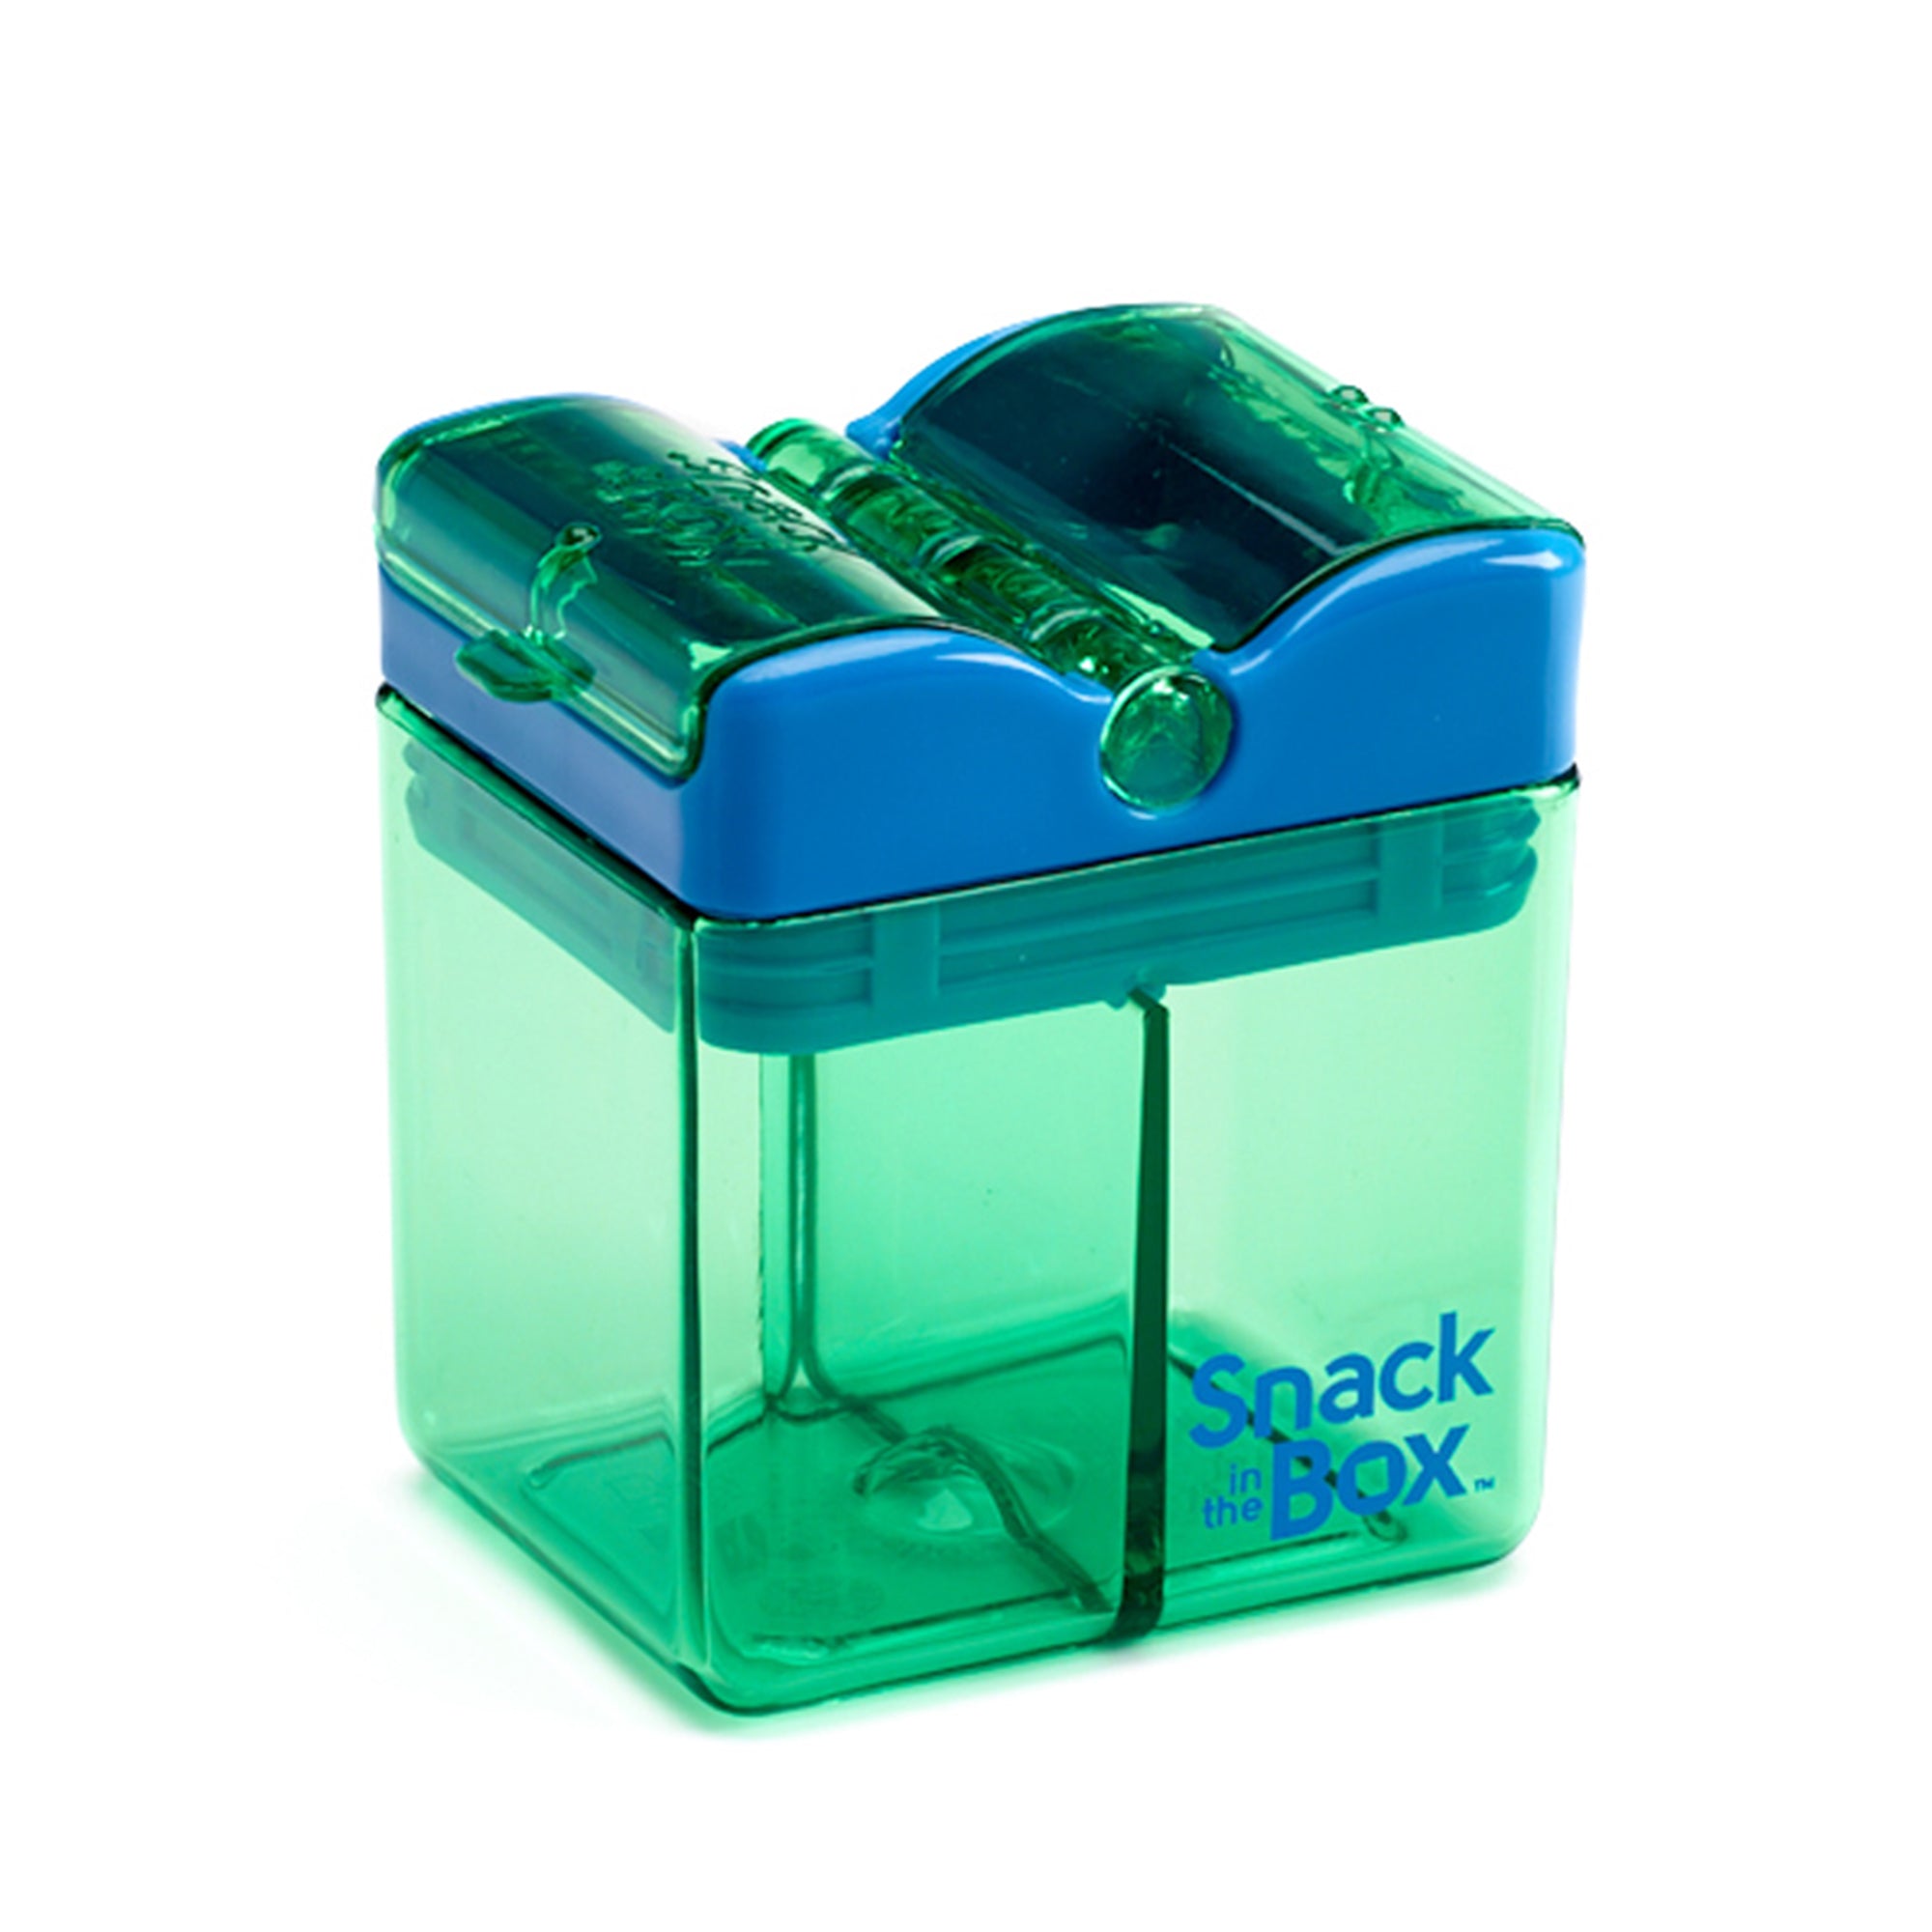 Snack-in-the-Box Reusable Dual-Compartment Snack Box: Green